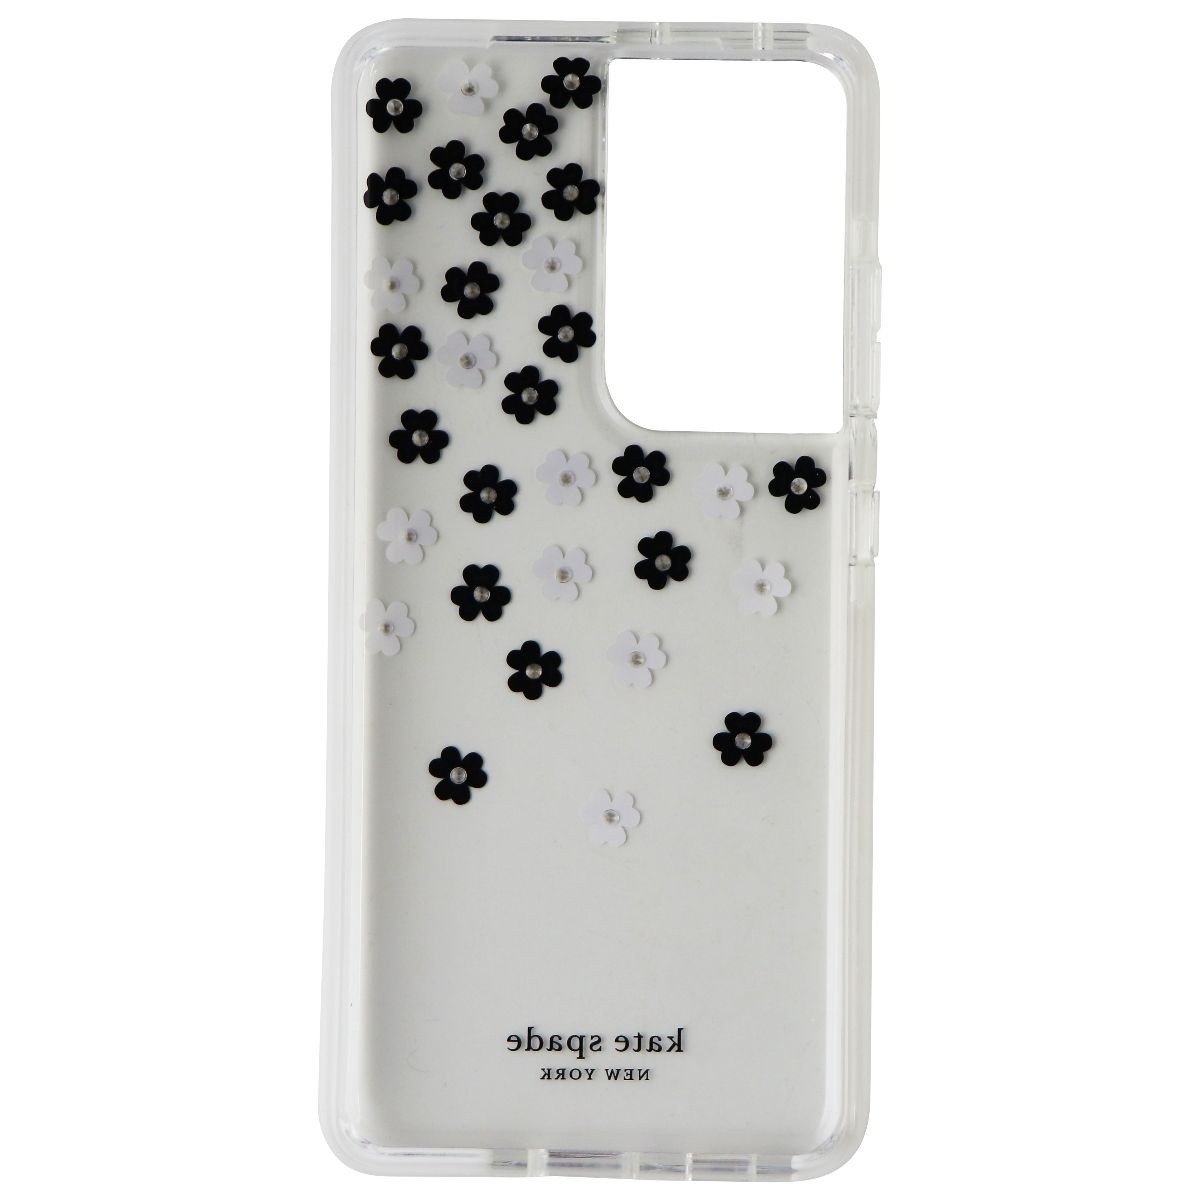 Kate Spade Defensive Hardshell Case For Galaxy S21 Ultra 5G - Scattered Flowers